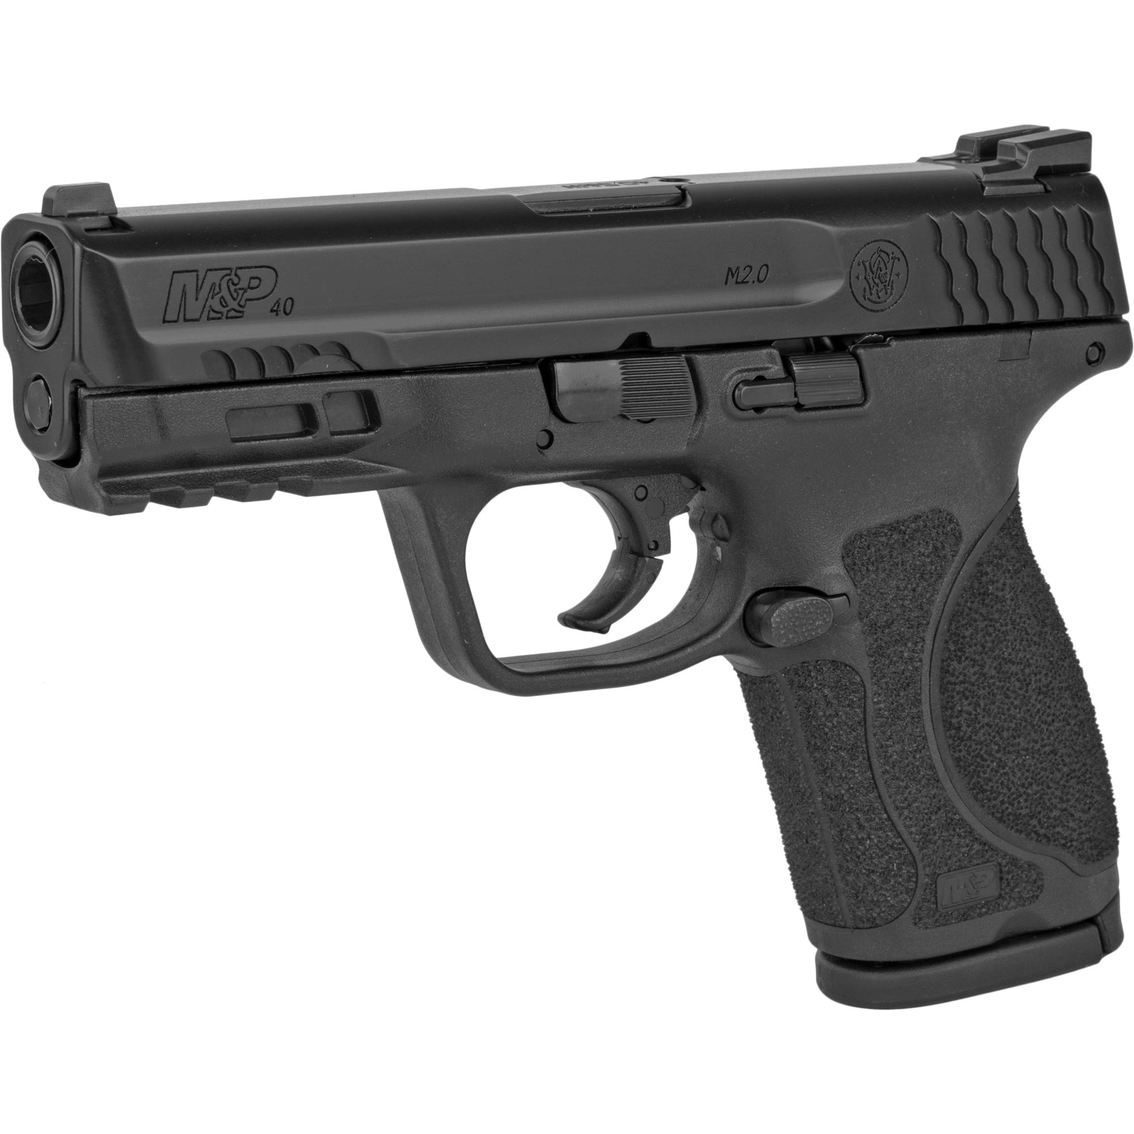 S&W M&P 2.0 Compact 40 S&W 4 in. Barrel 13 Rds 3-Mags Pistol Black - Image 3 of 3